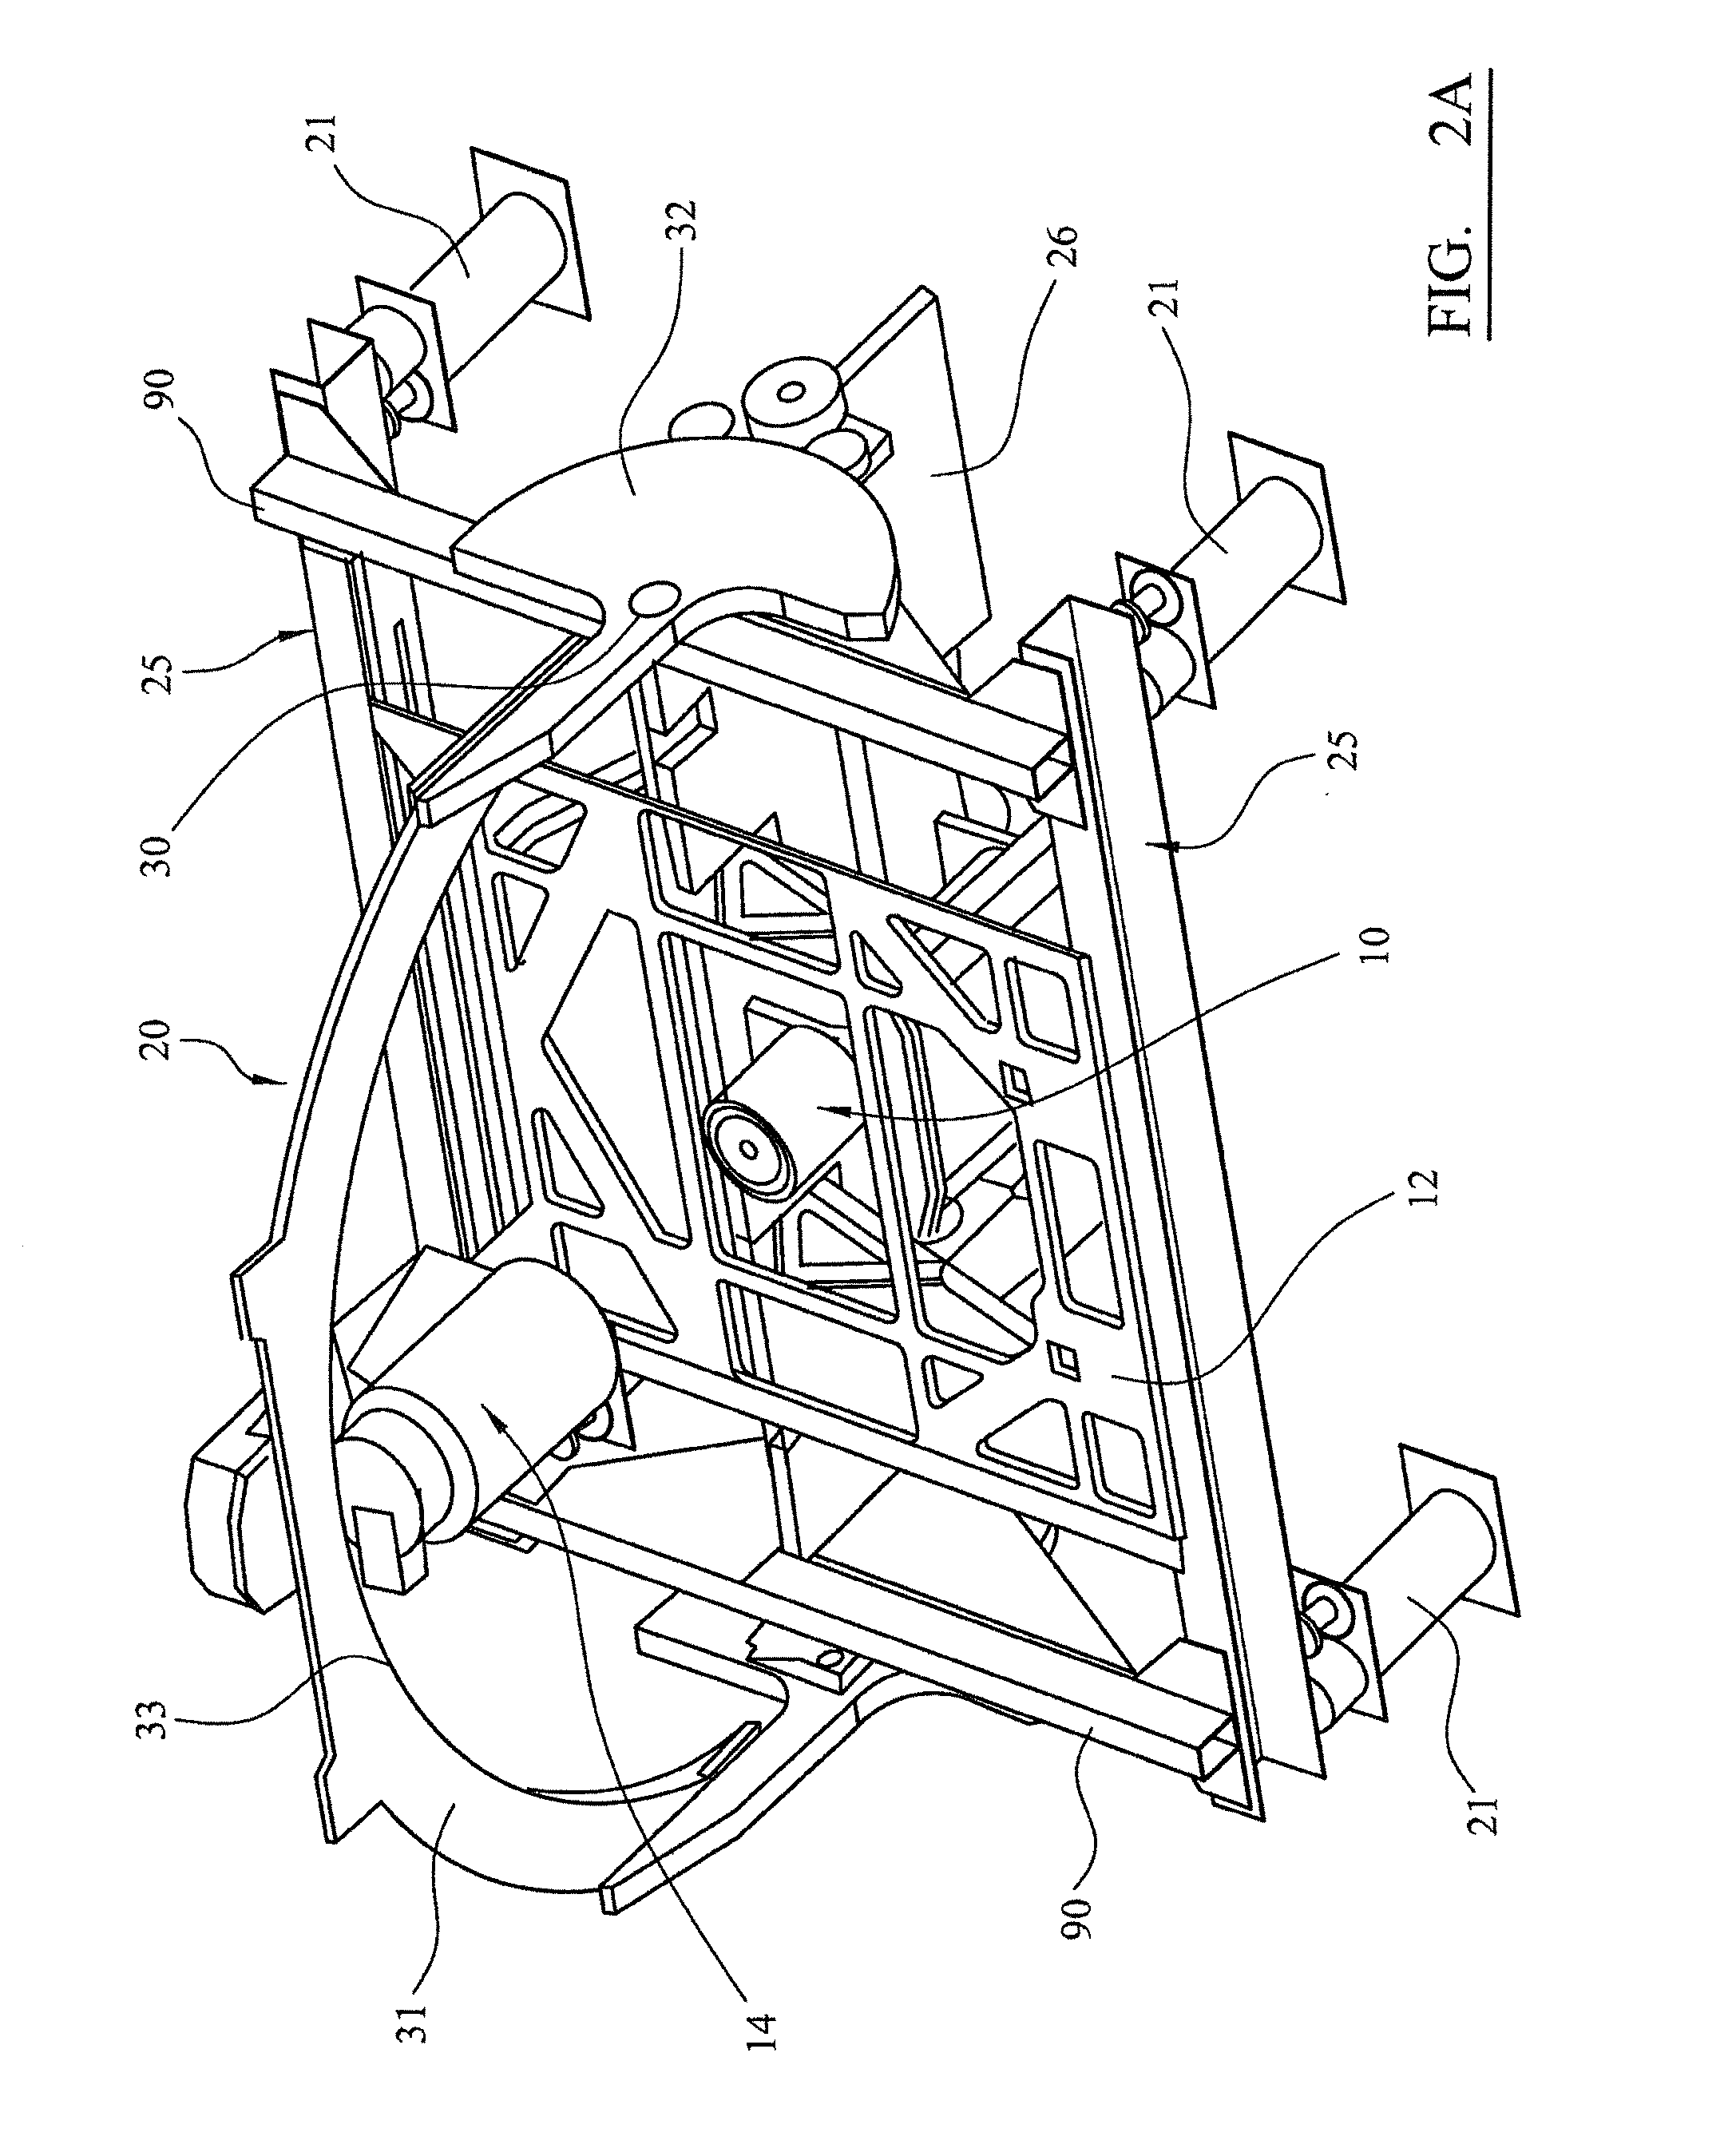 Method and apparatus for generating a three-dimensional model of a region of interest using an imaging system